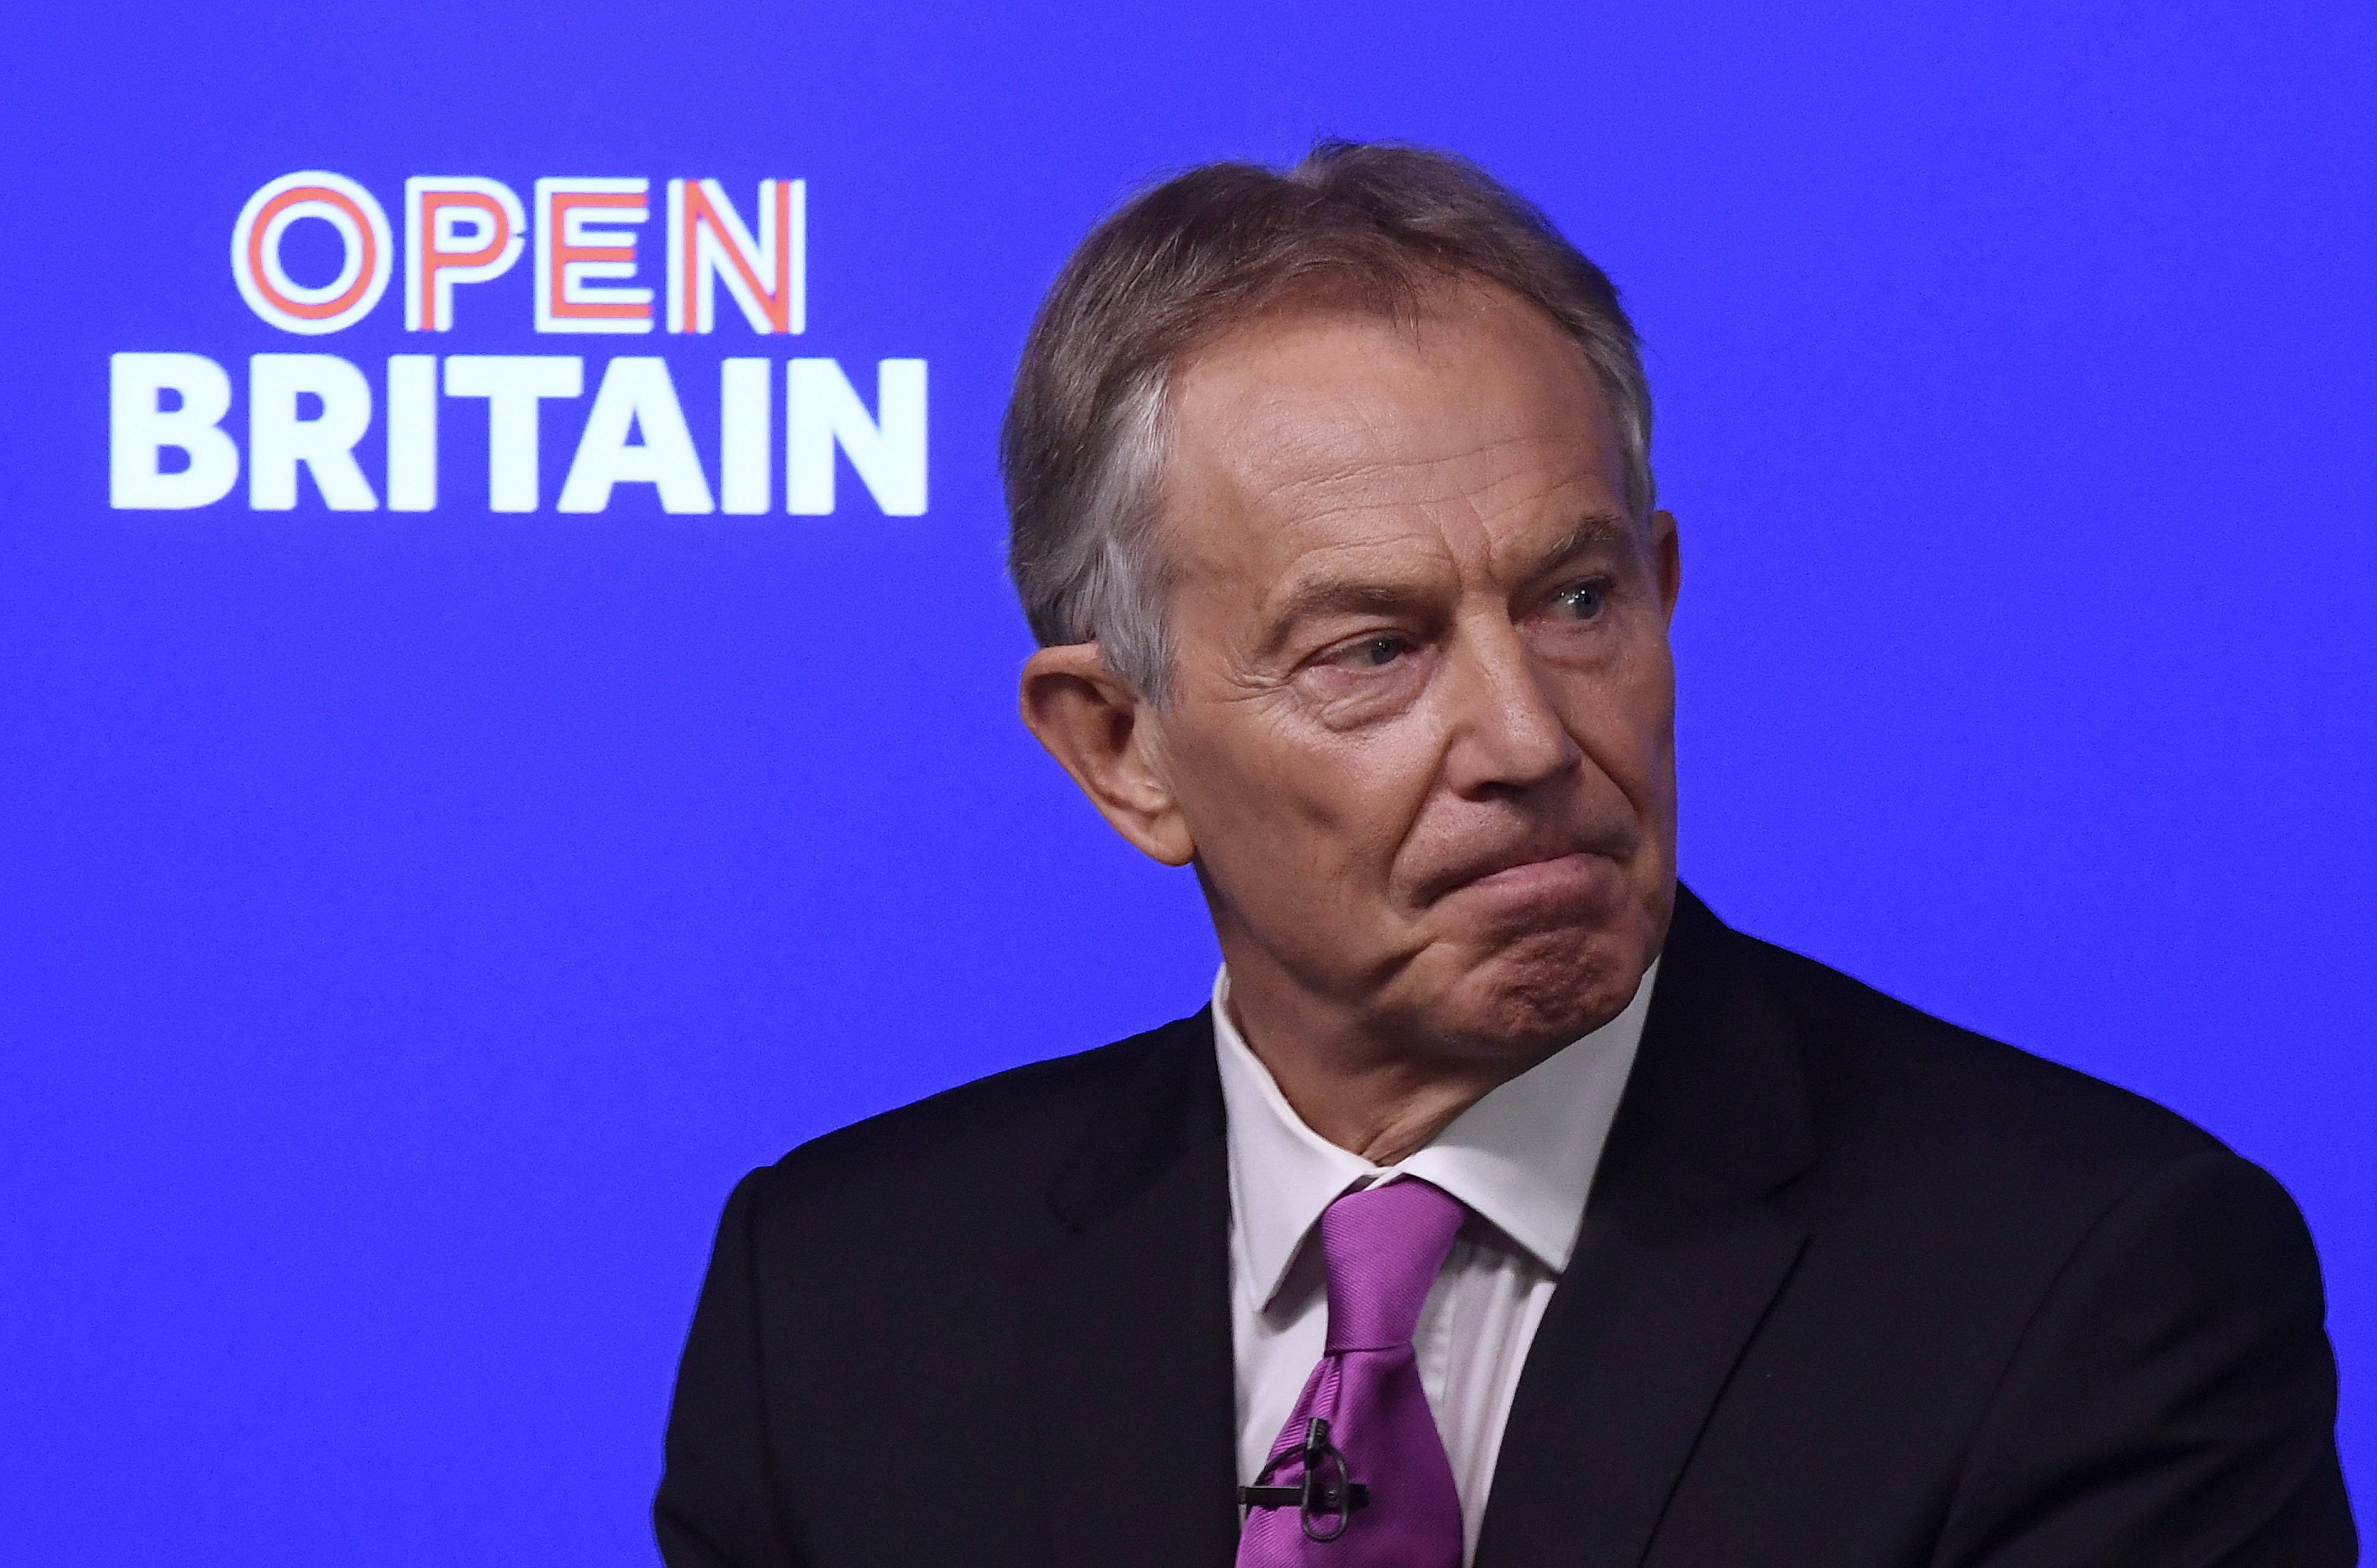 Former British Prime Minister Tony Blair delivers a keynote speech at a pro-Europe event in London